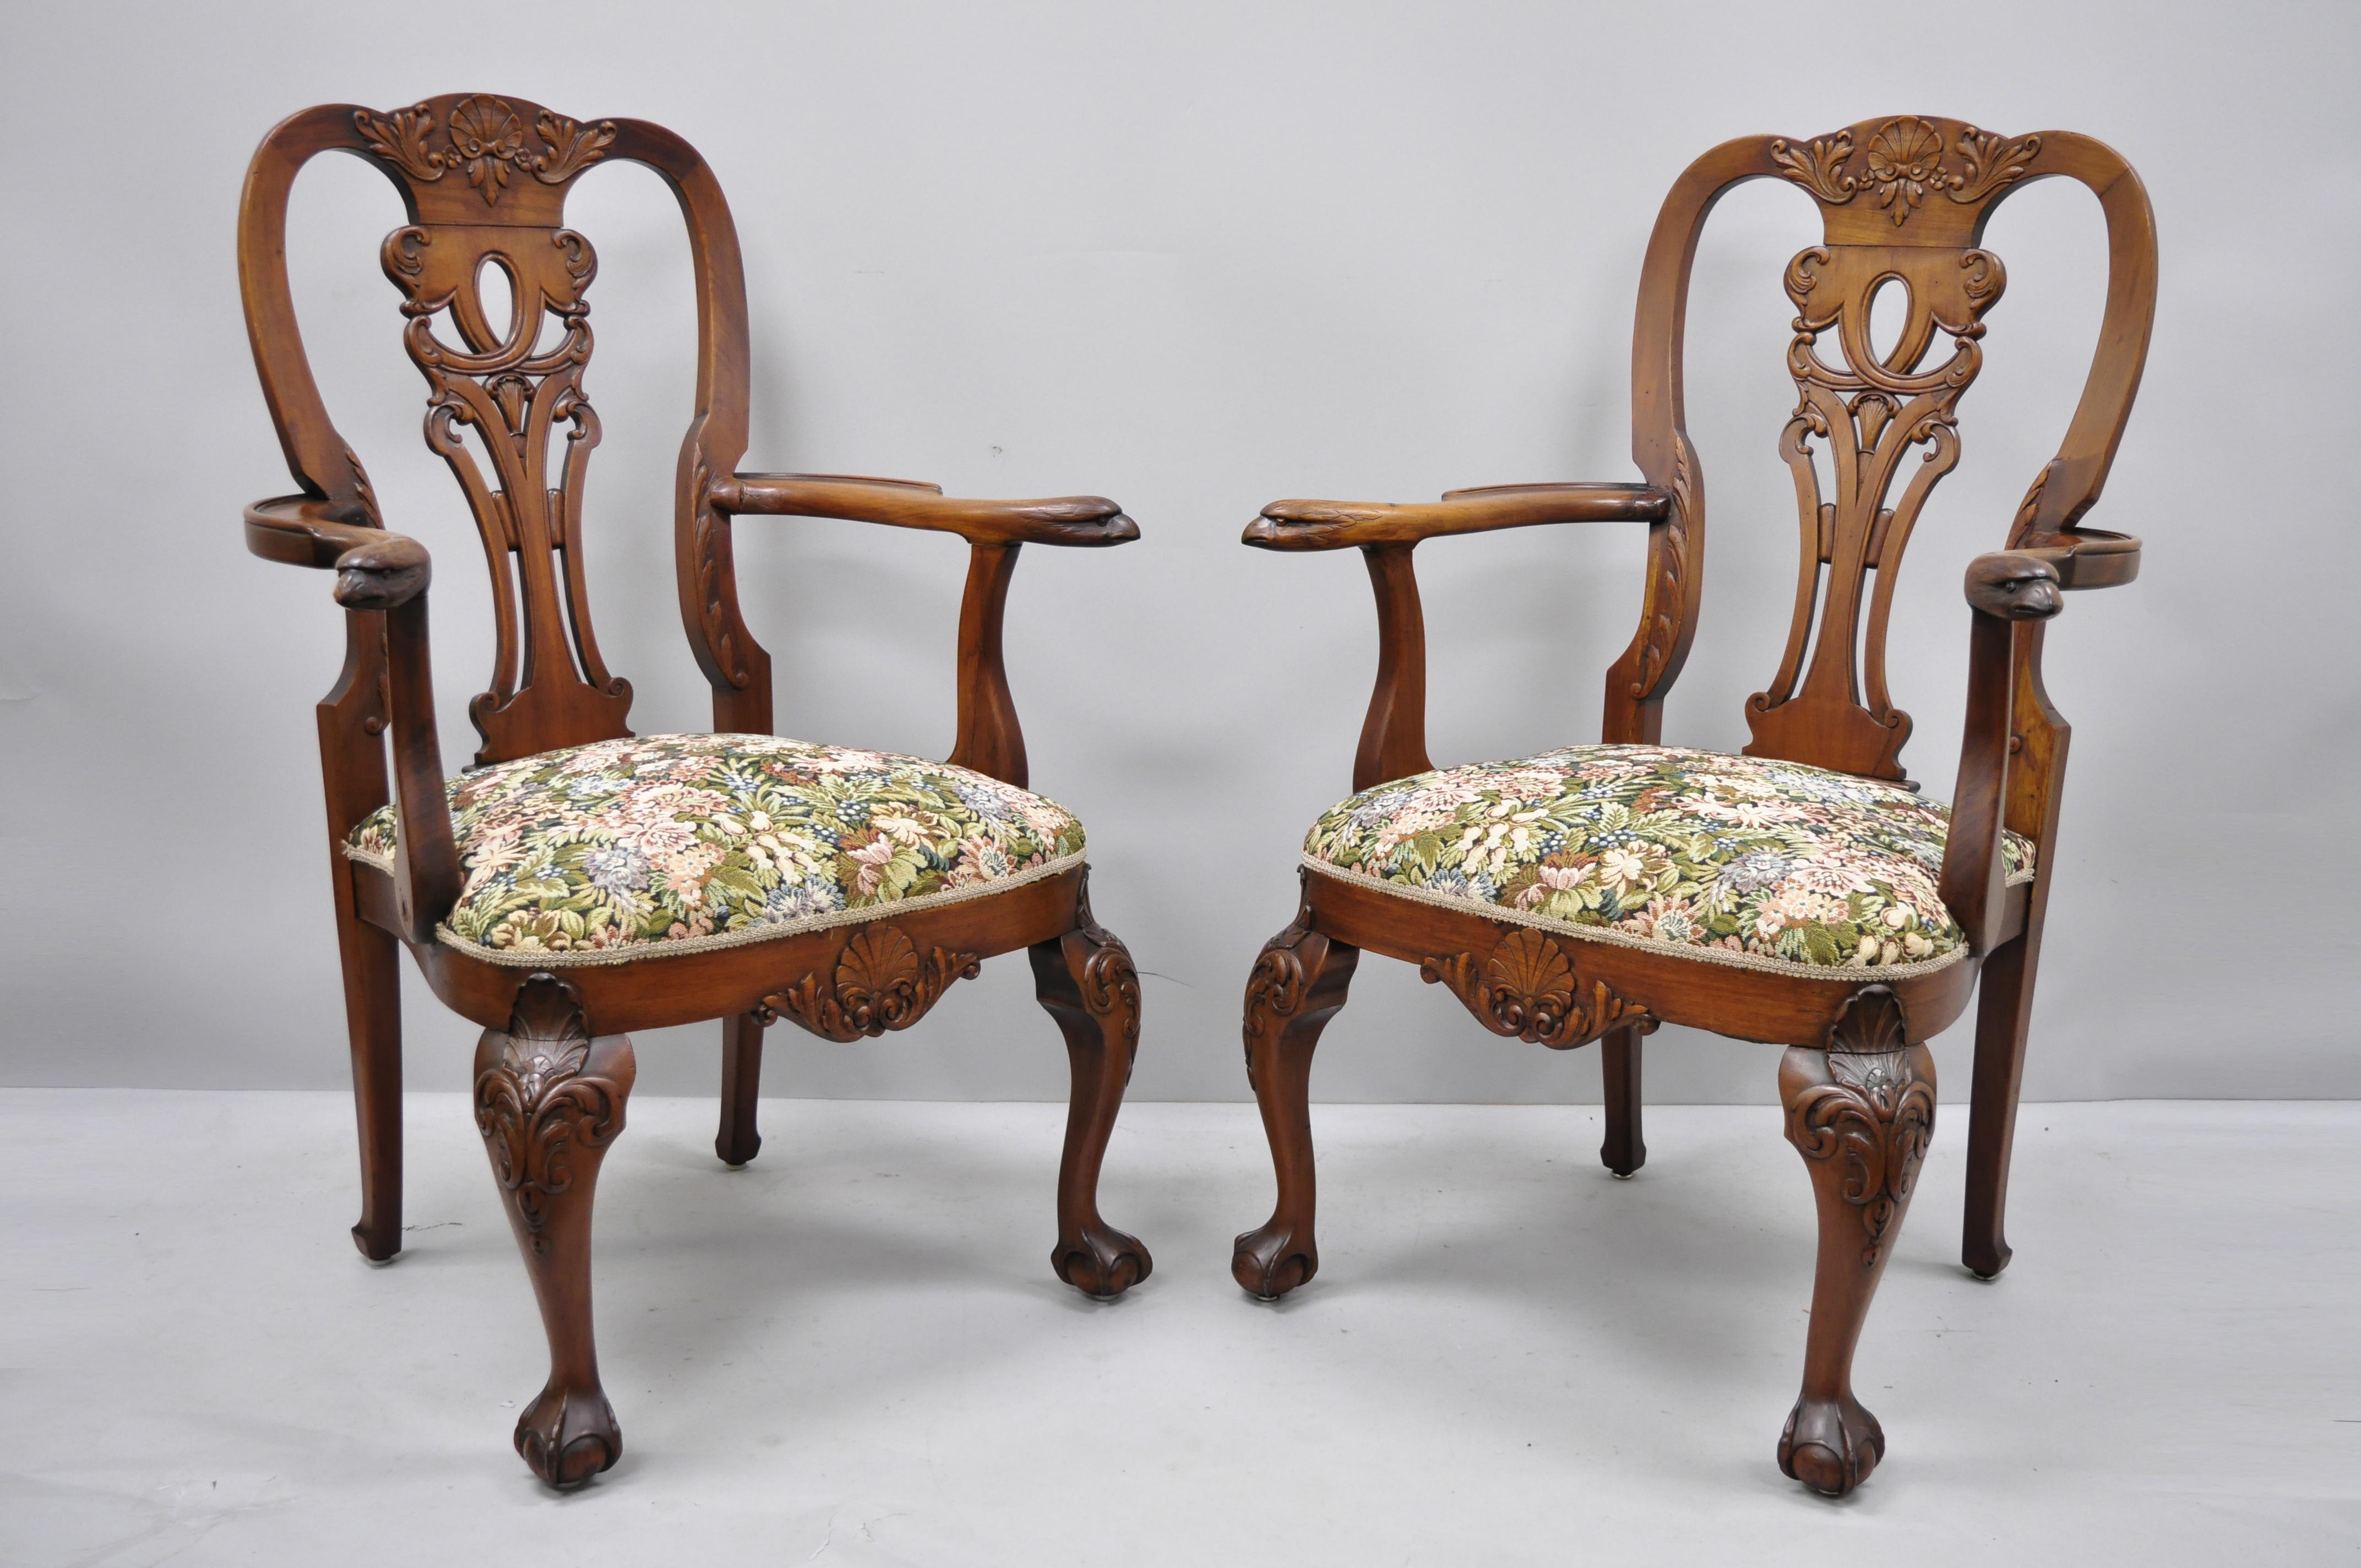 Early 20th century mahogany Chippendale style armchairs carved with eagle heads. Item features eagle head carved armrests, ball and claw feet, shell carved knees and lower rail, acanthus leaf carved scrollwork, solid wood construction, beautiful